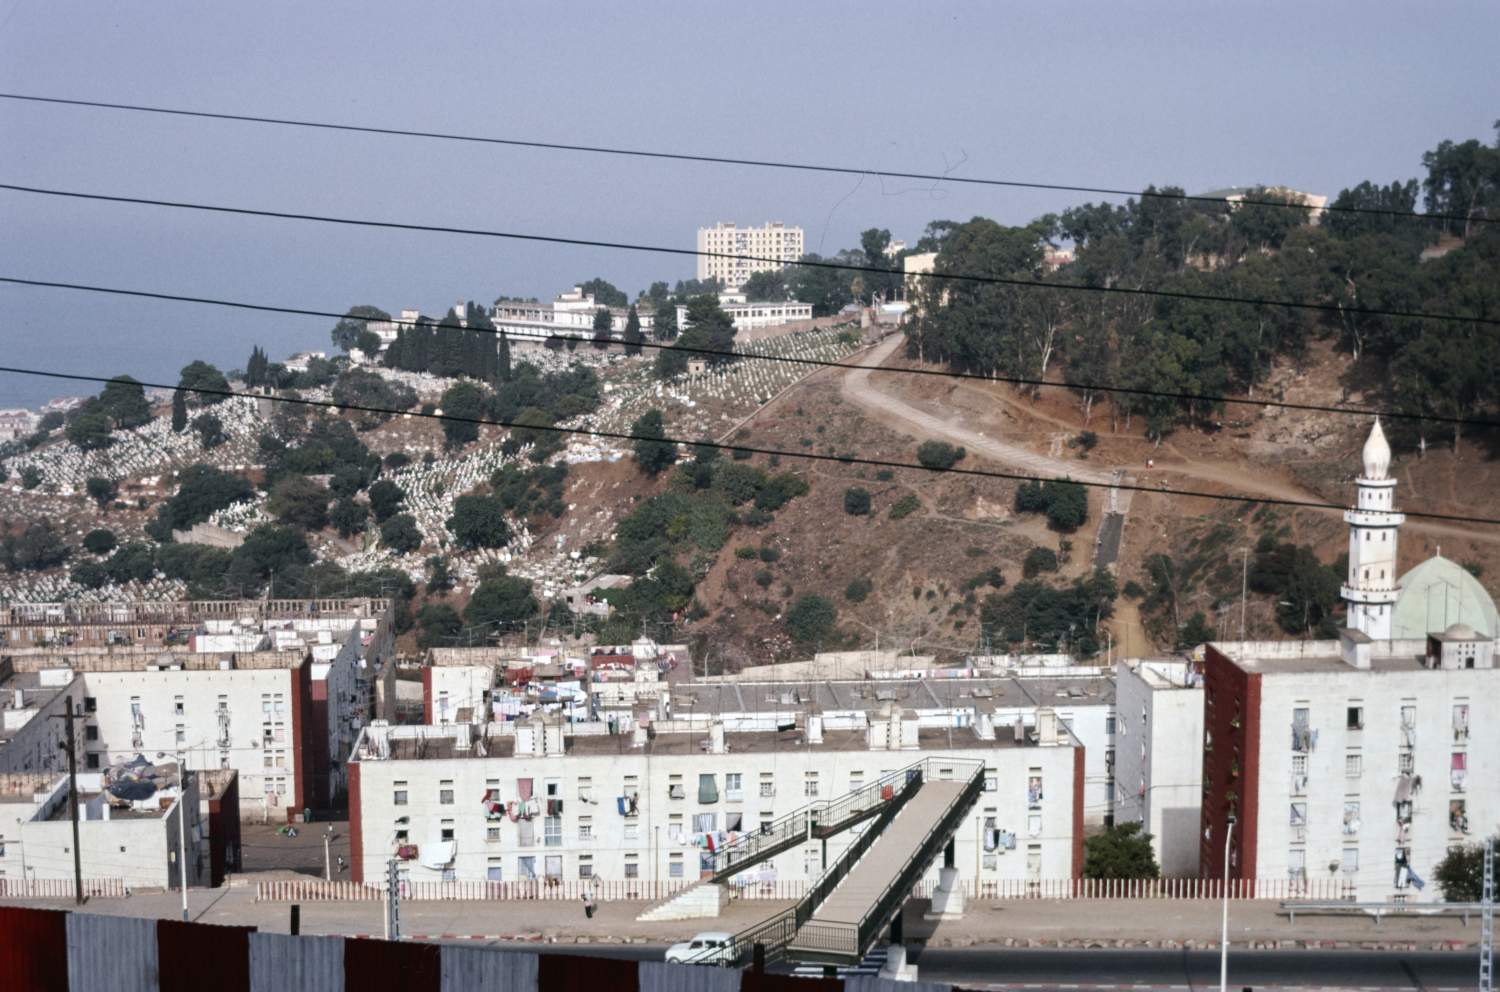 View of hill and buildings from above